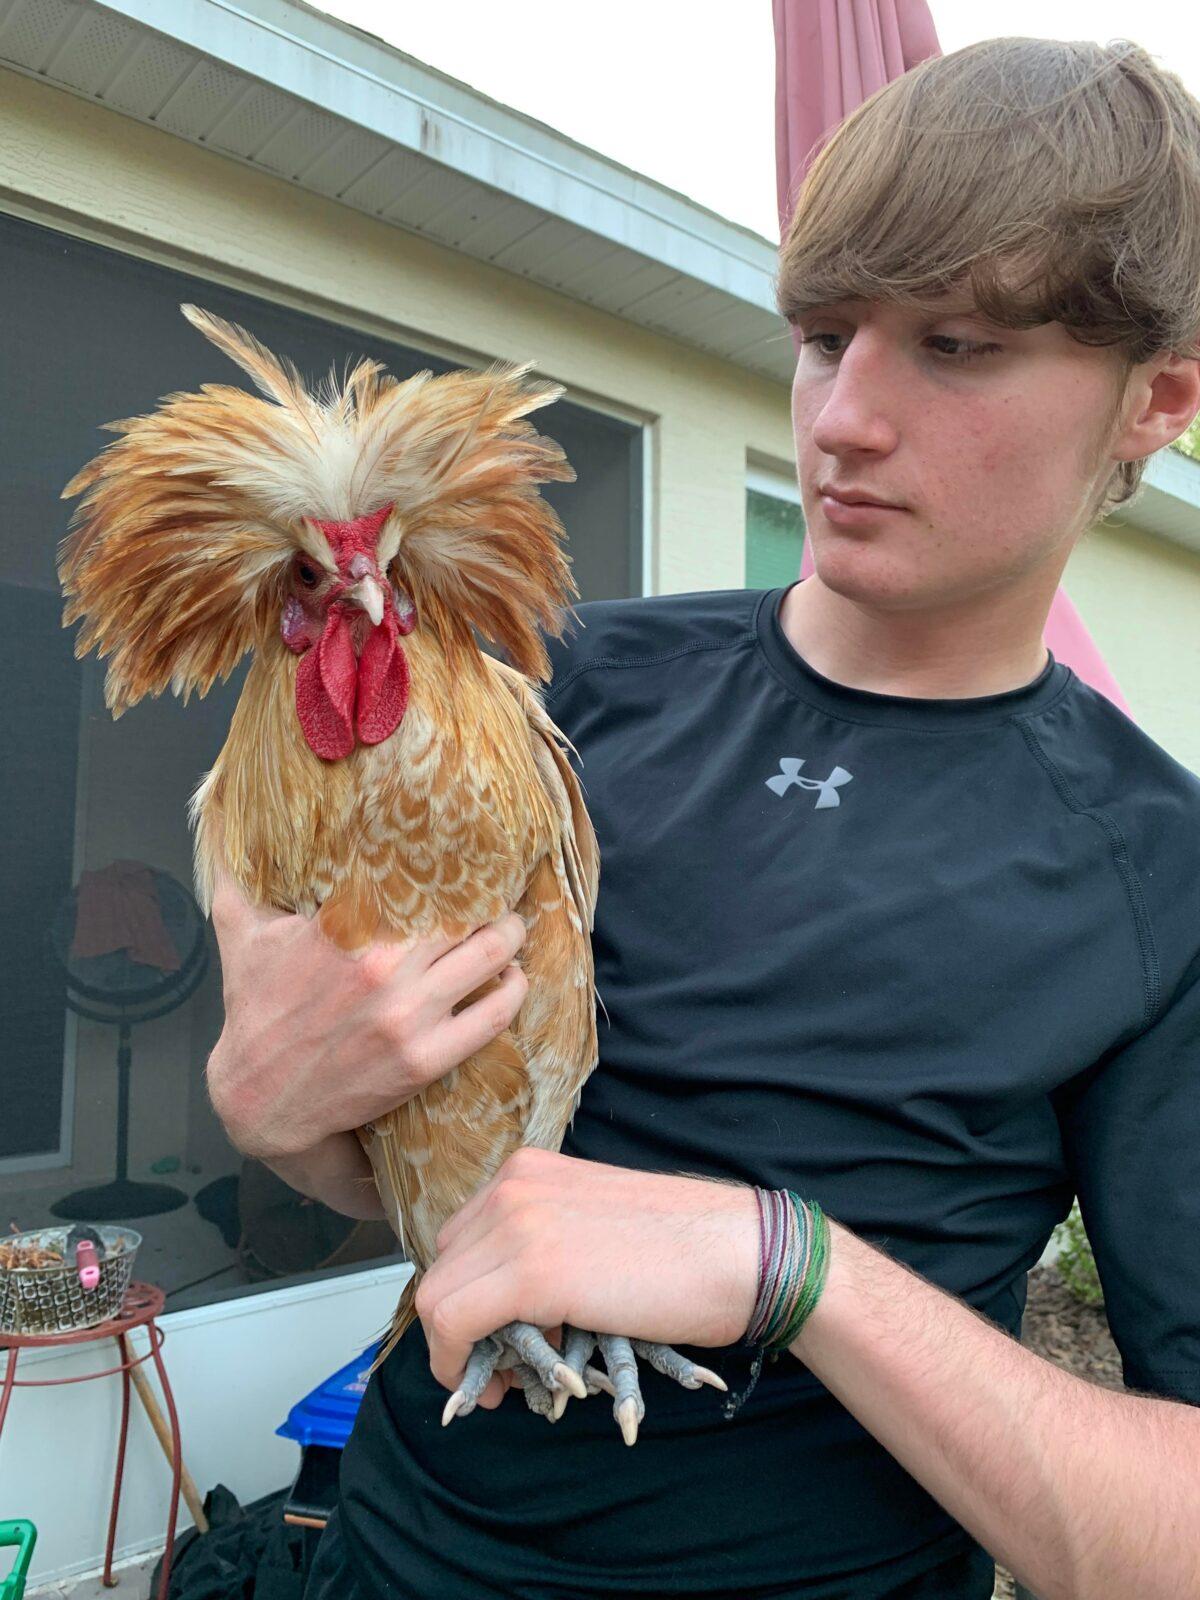 Sheilah Sepe Maples' son, Kyle Maples, 17, holds a popular ornamental breed of chicken known as a buff laced Polish. (Courtesy of Sheilah Sepe Maples)